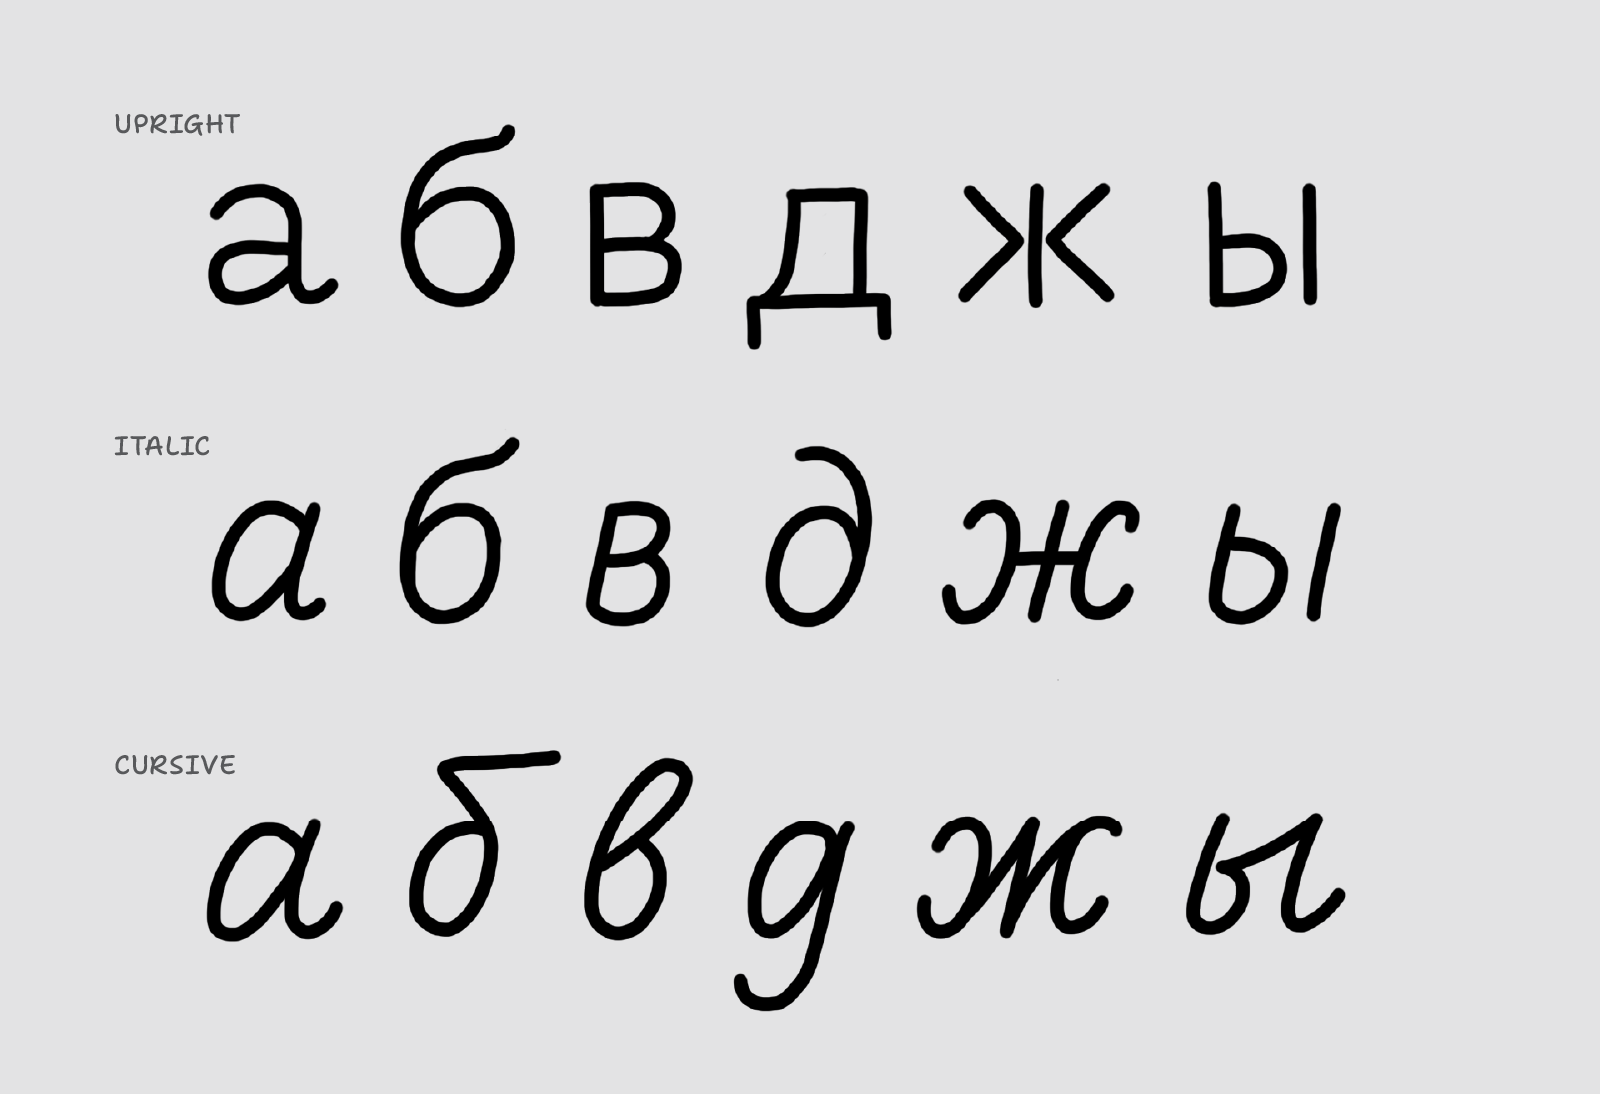 Cyrillic characters а, б, в, д, ж, and ы in upright, italic and cursive styles of writing